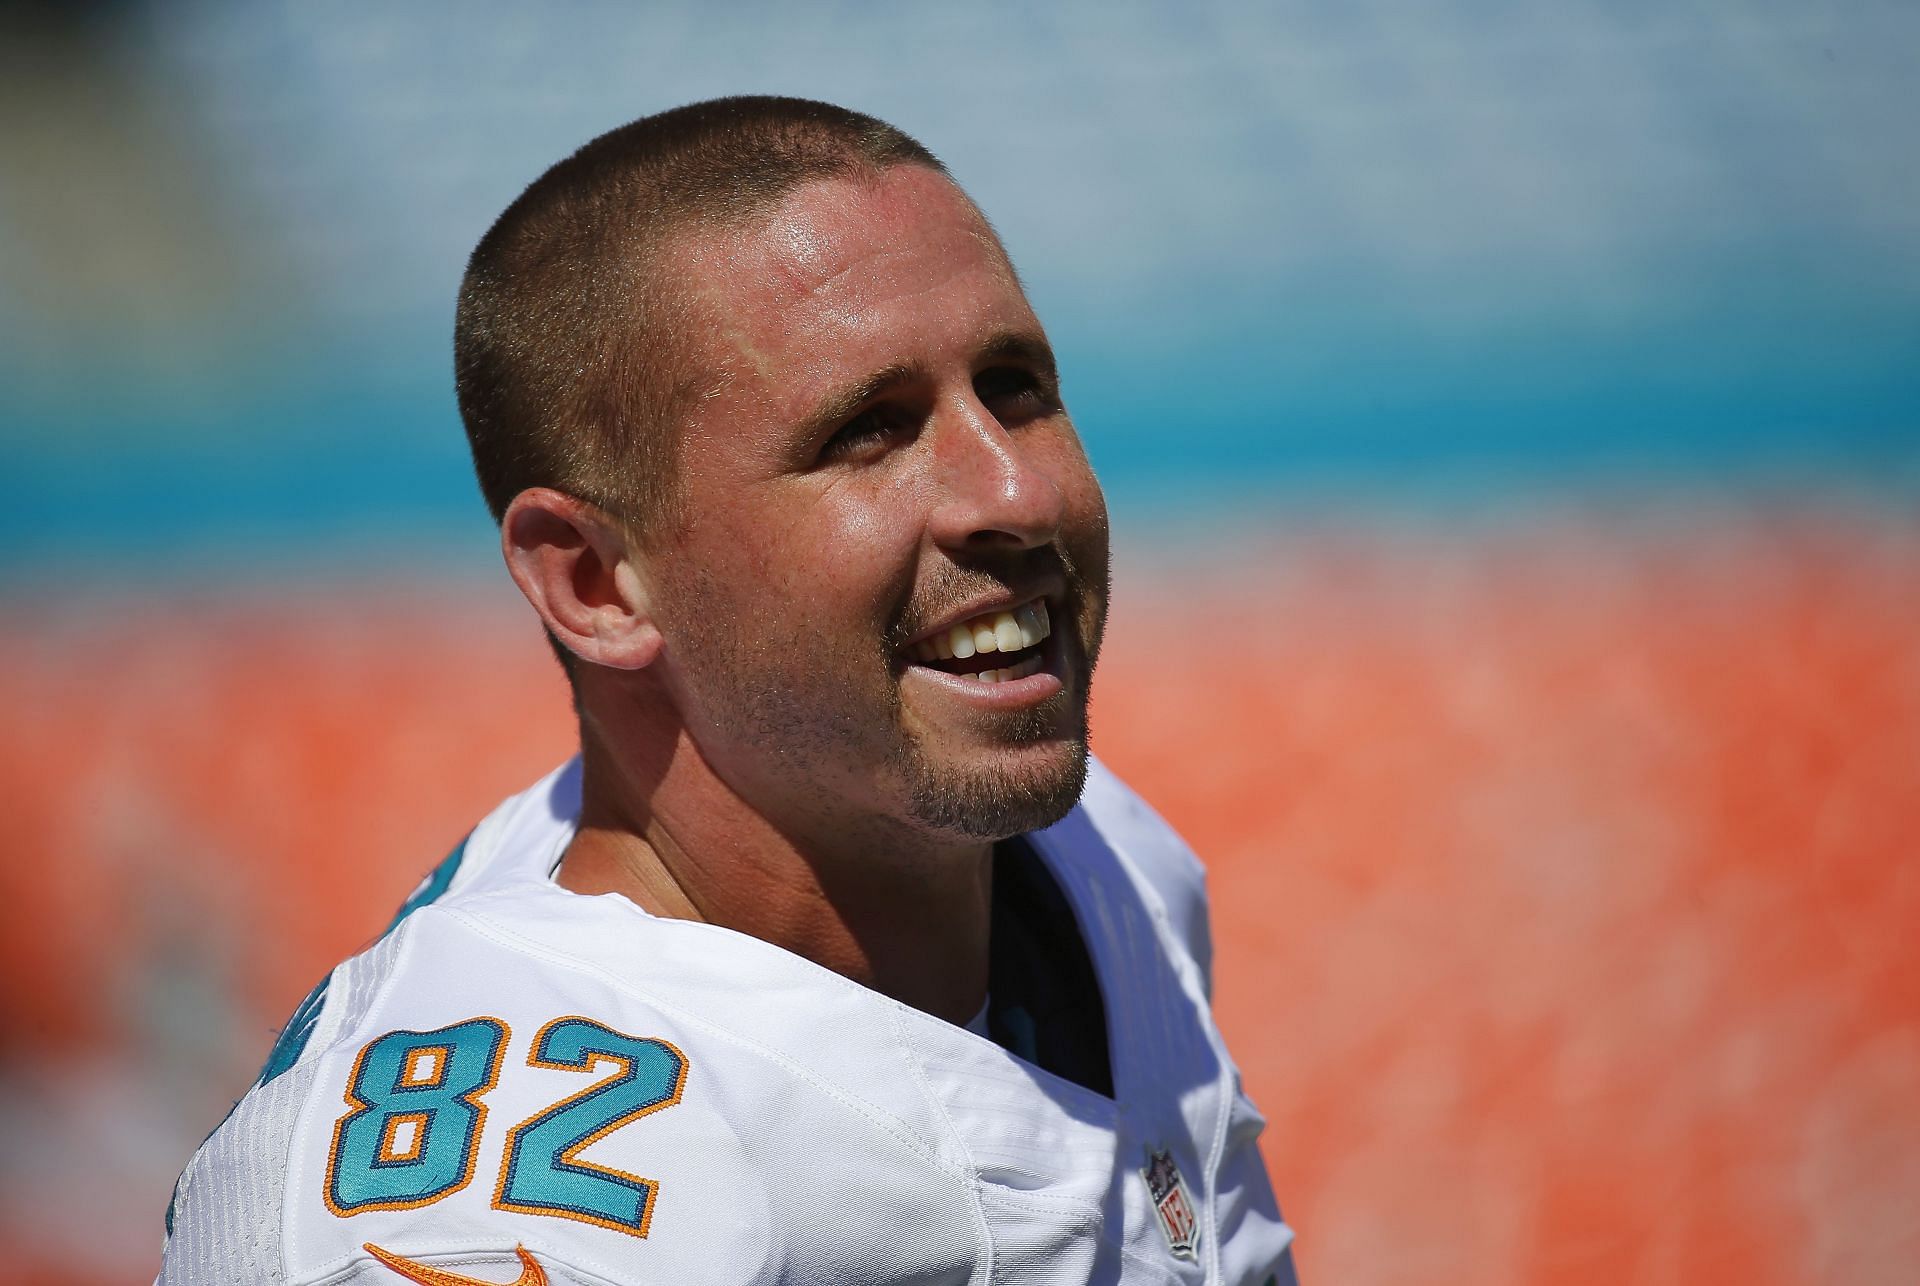 Brian Hartline during his playing days